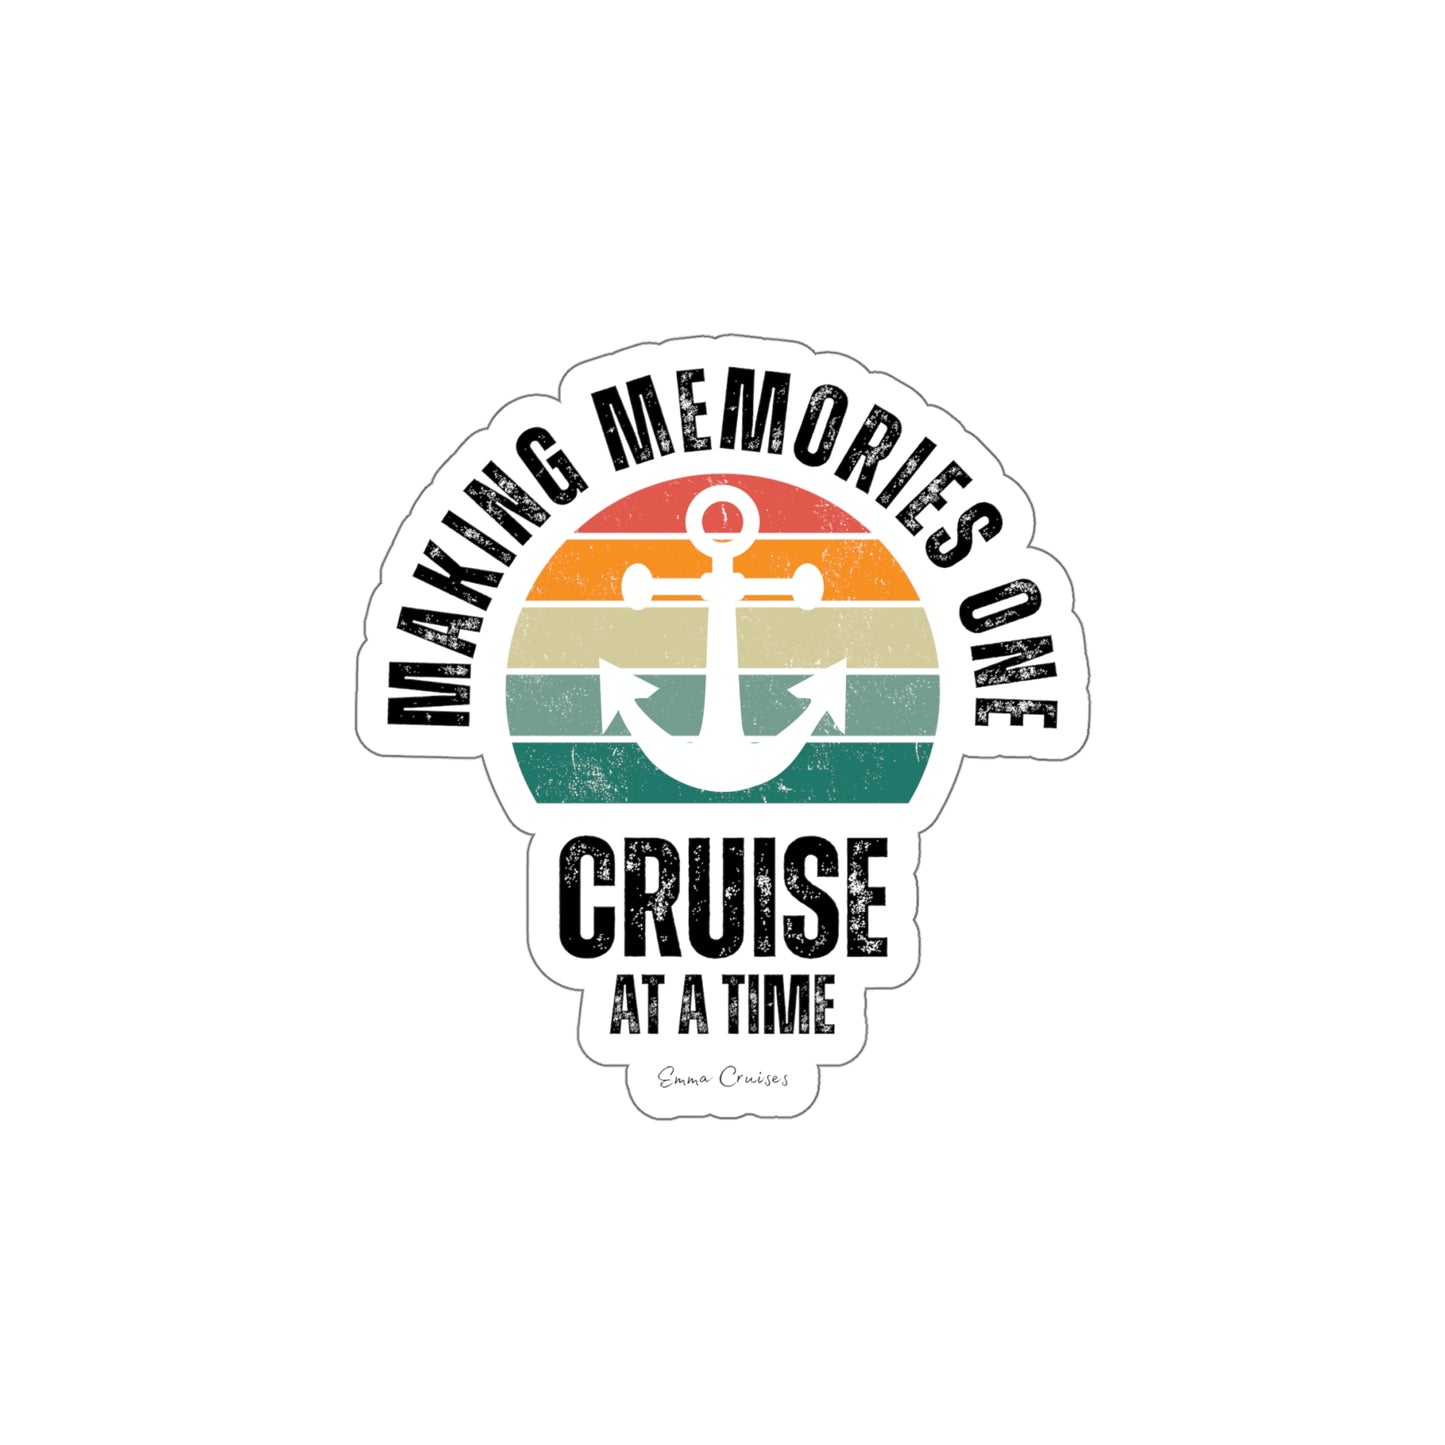 Making Memories One Cruise at a Time - Die-Cut Sticker